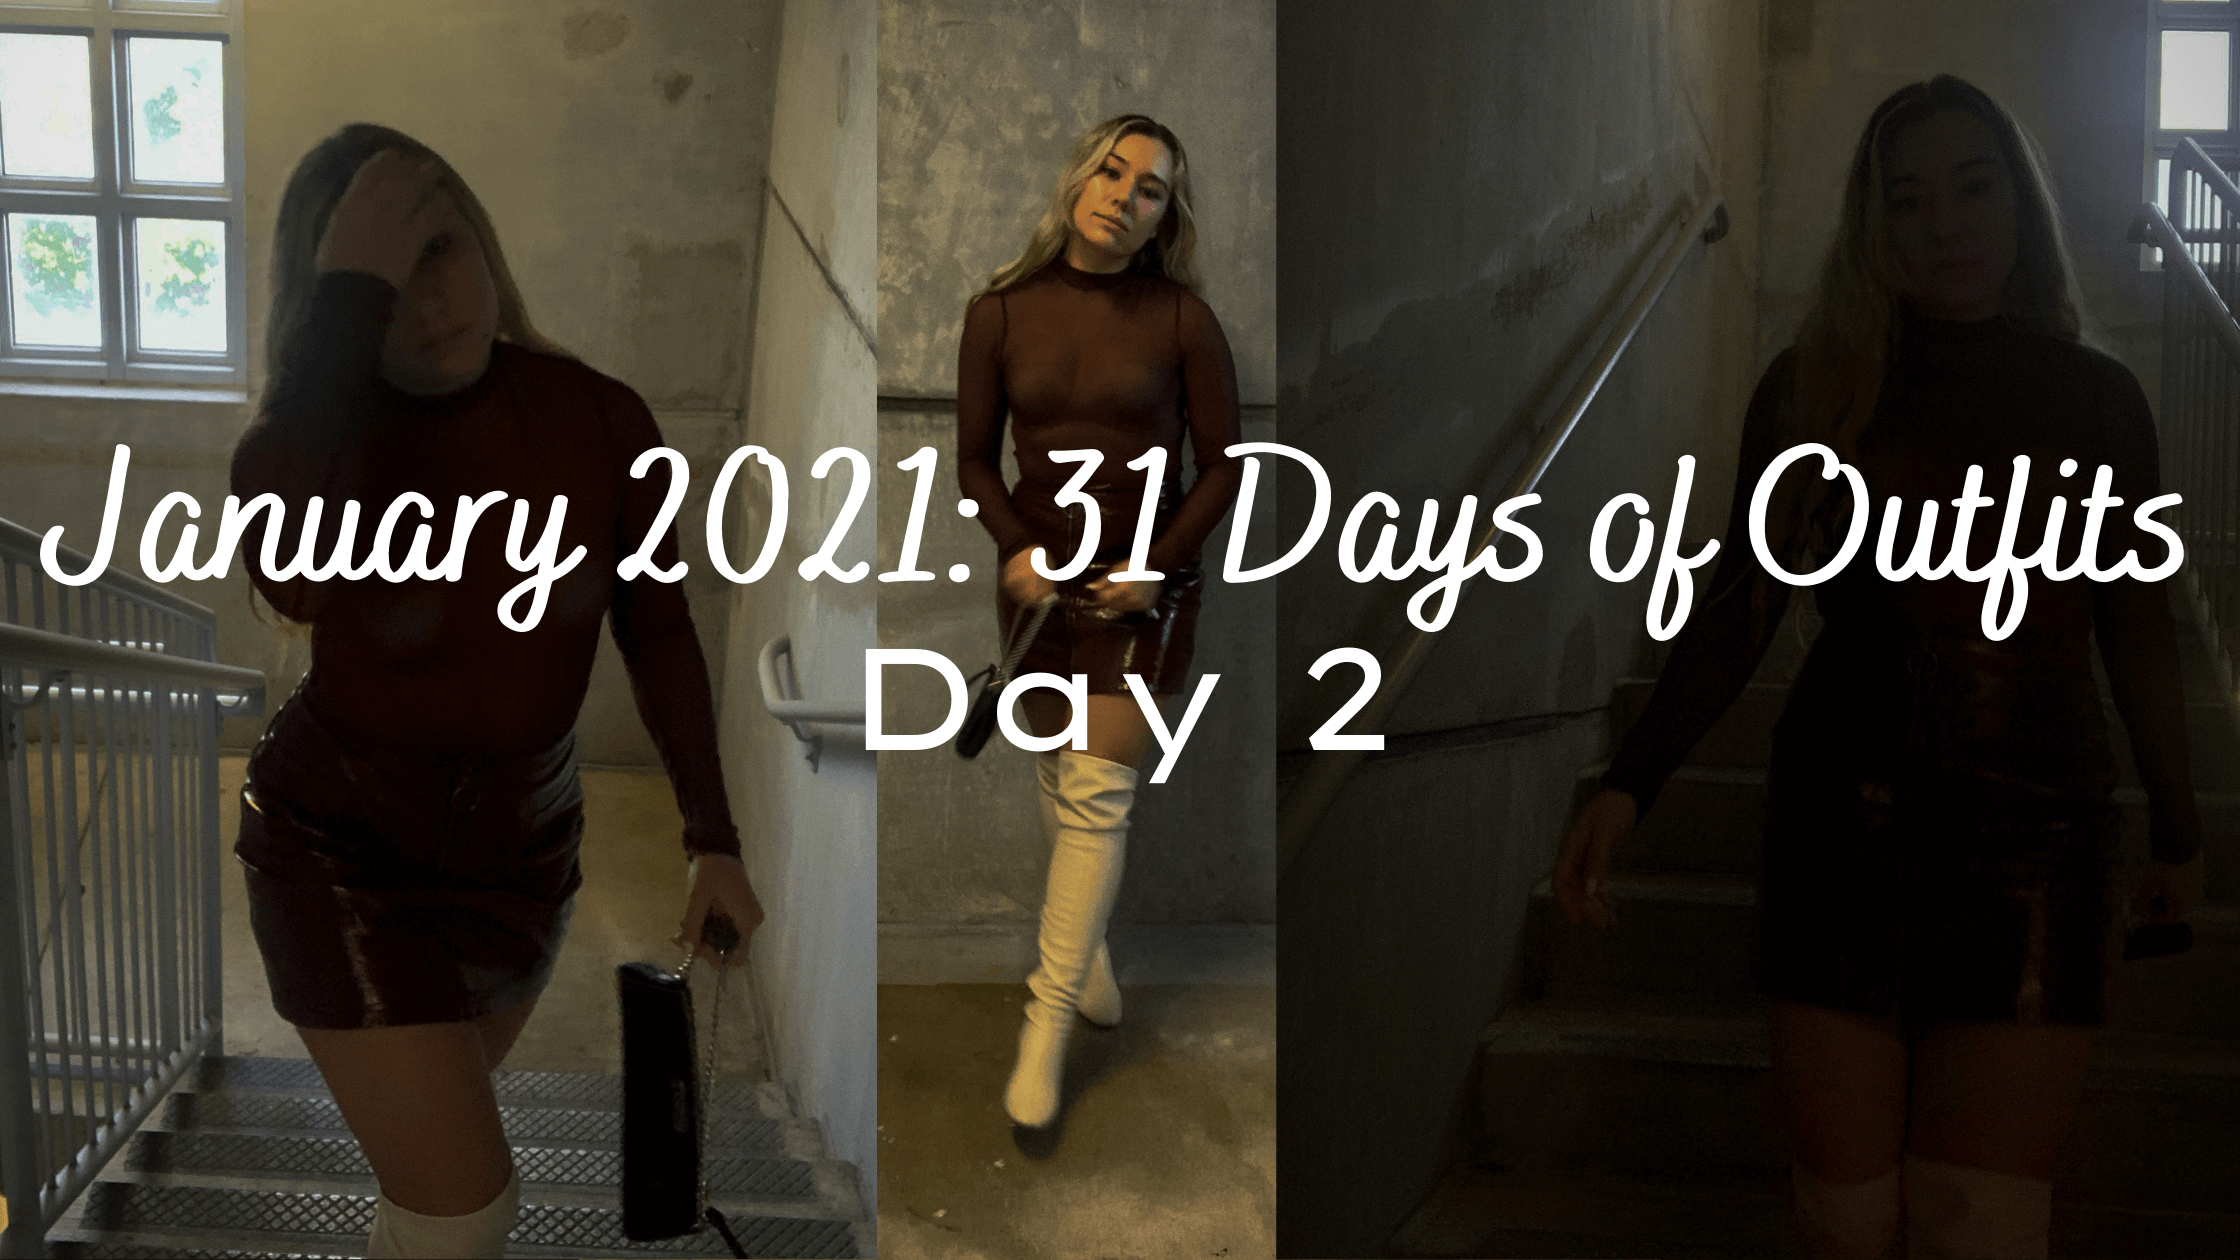 JANUARY 2021 31 DAYS OF OUTFITS: DAY 2